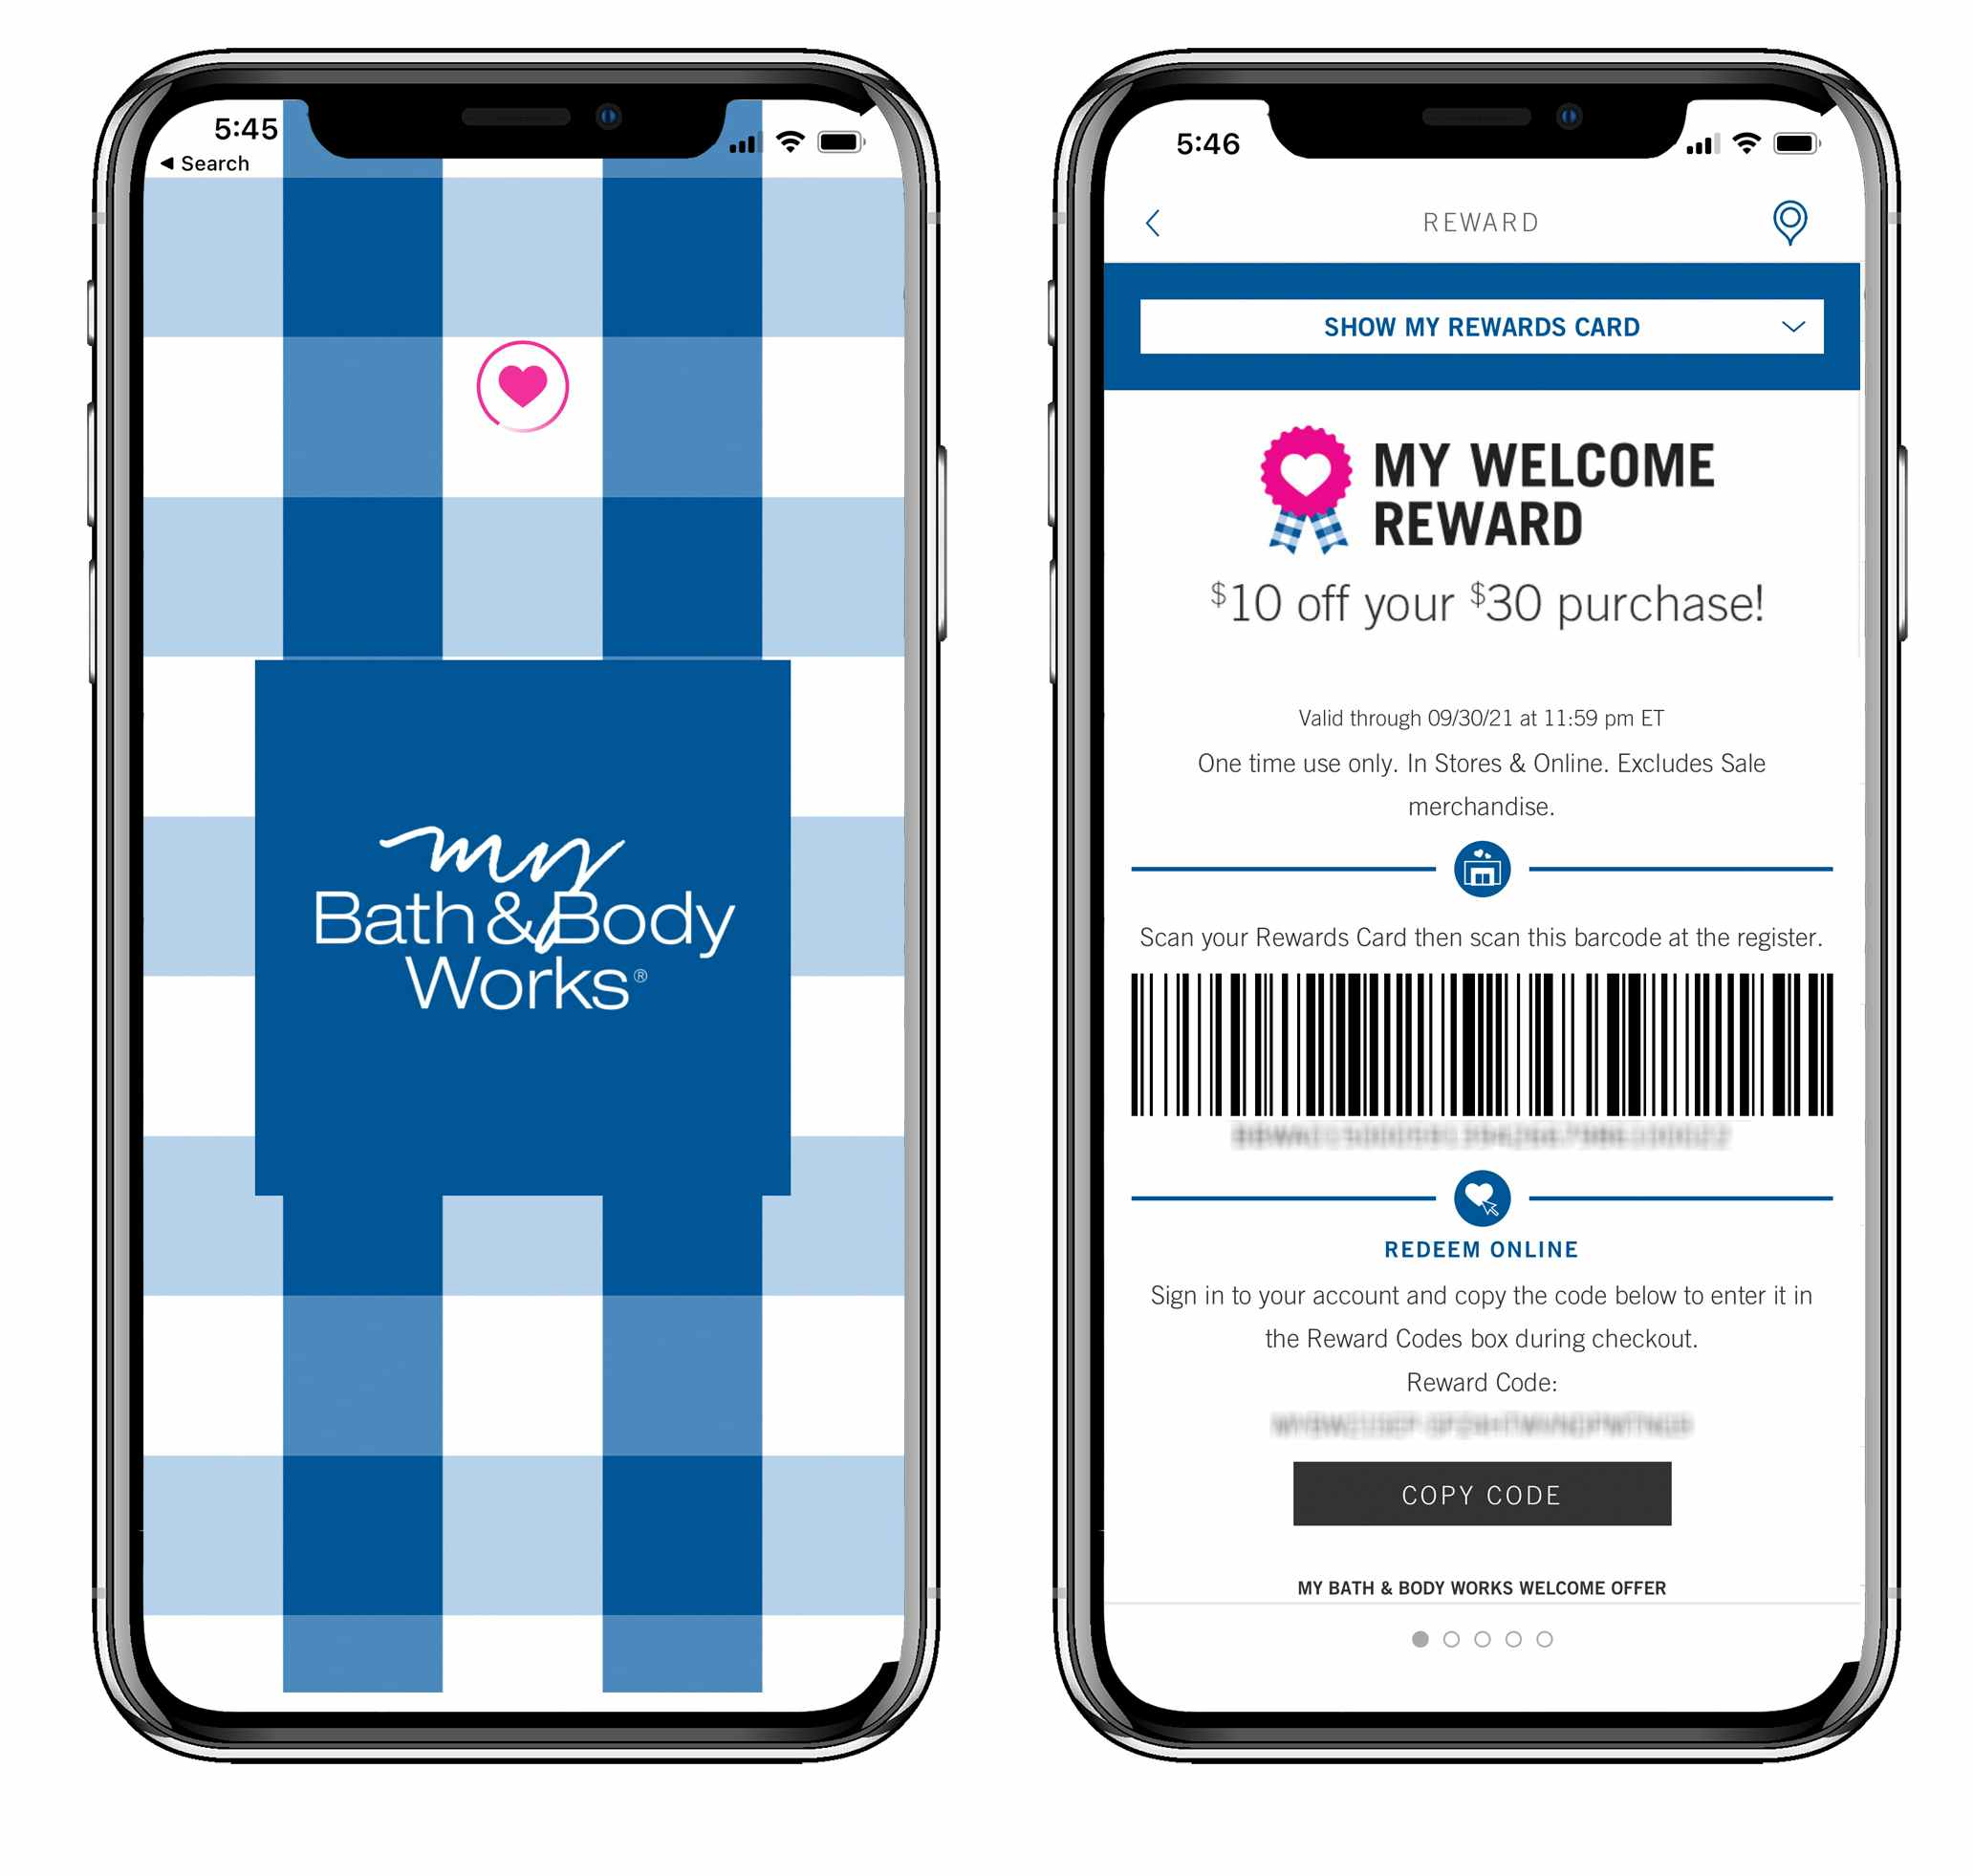 A graphic of two iPhones, one showing the My Bath & Body Works app start screen and the other showing a welcome reward coupon for $10 off...